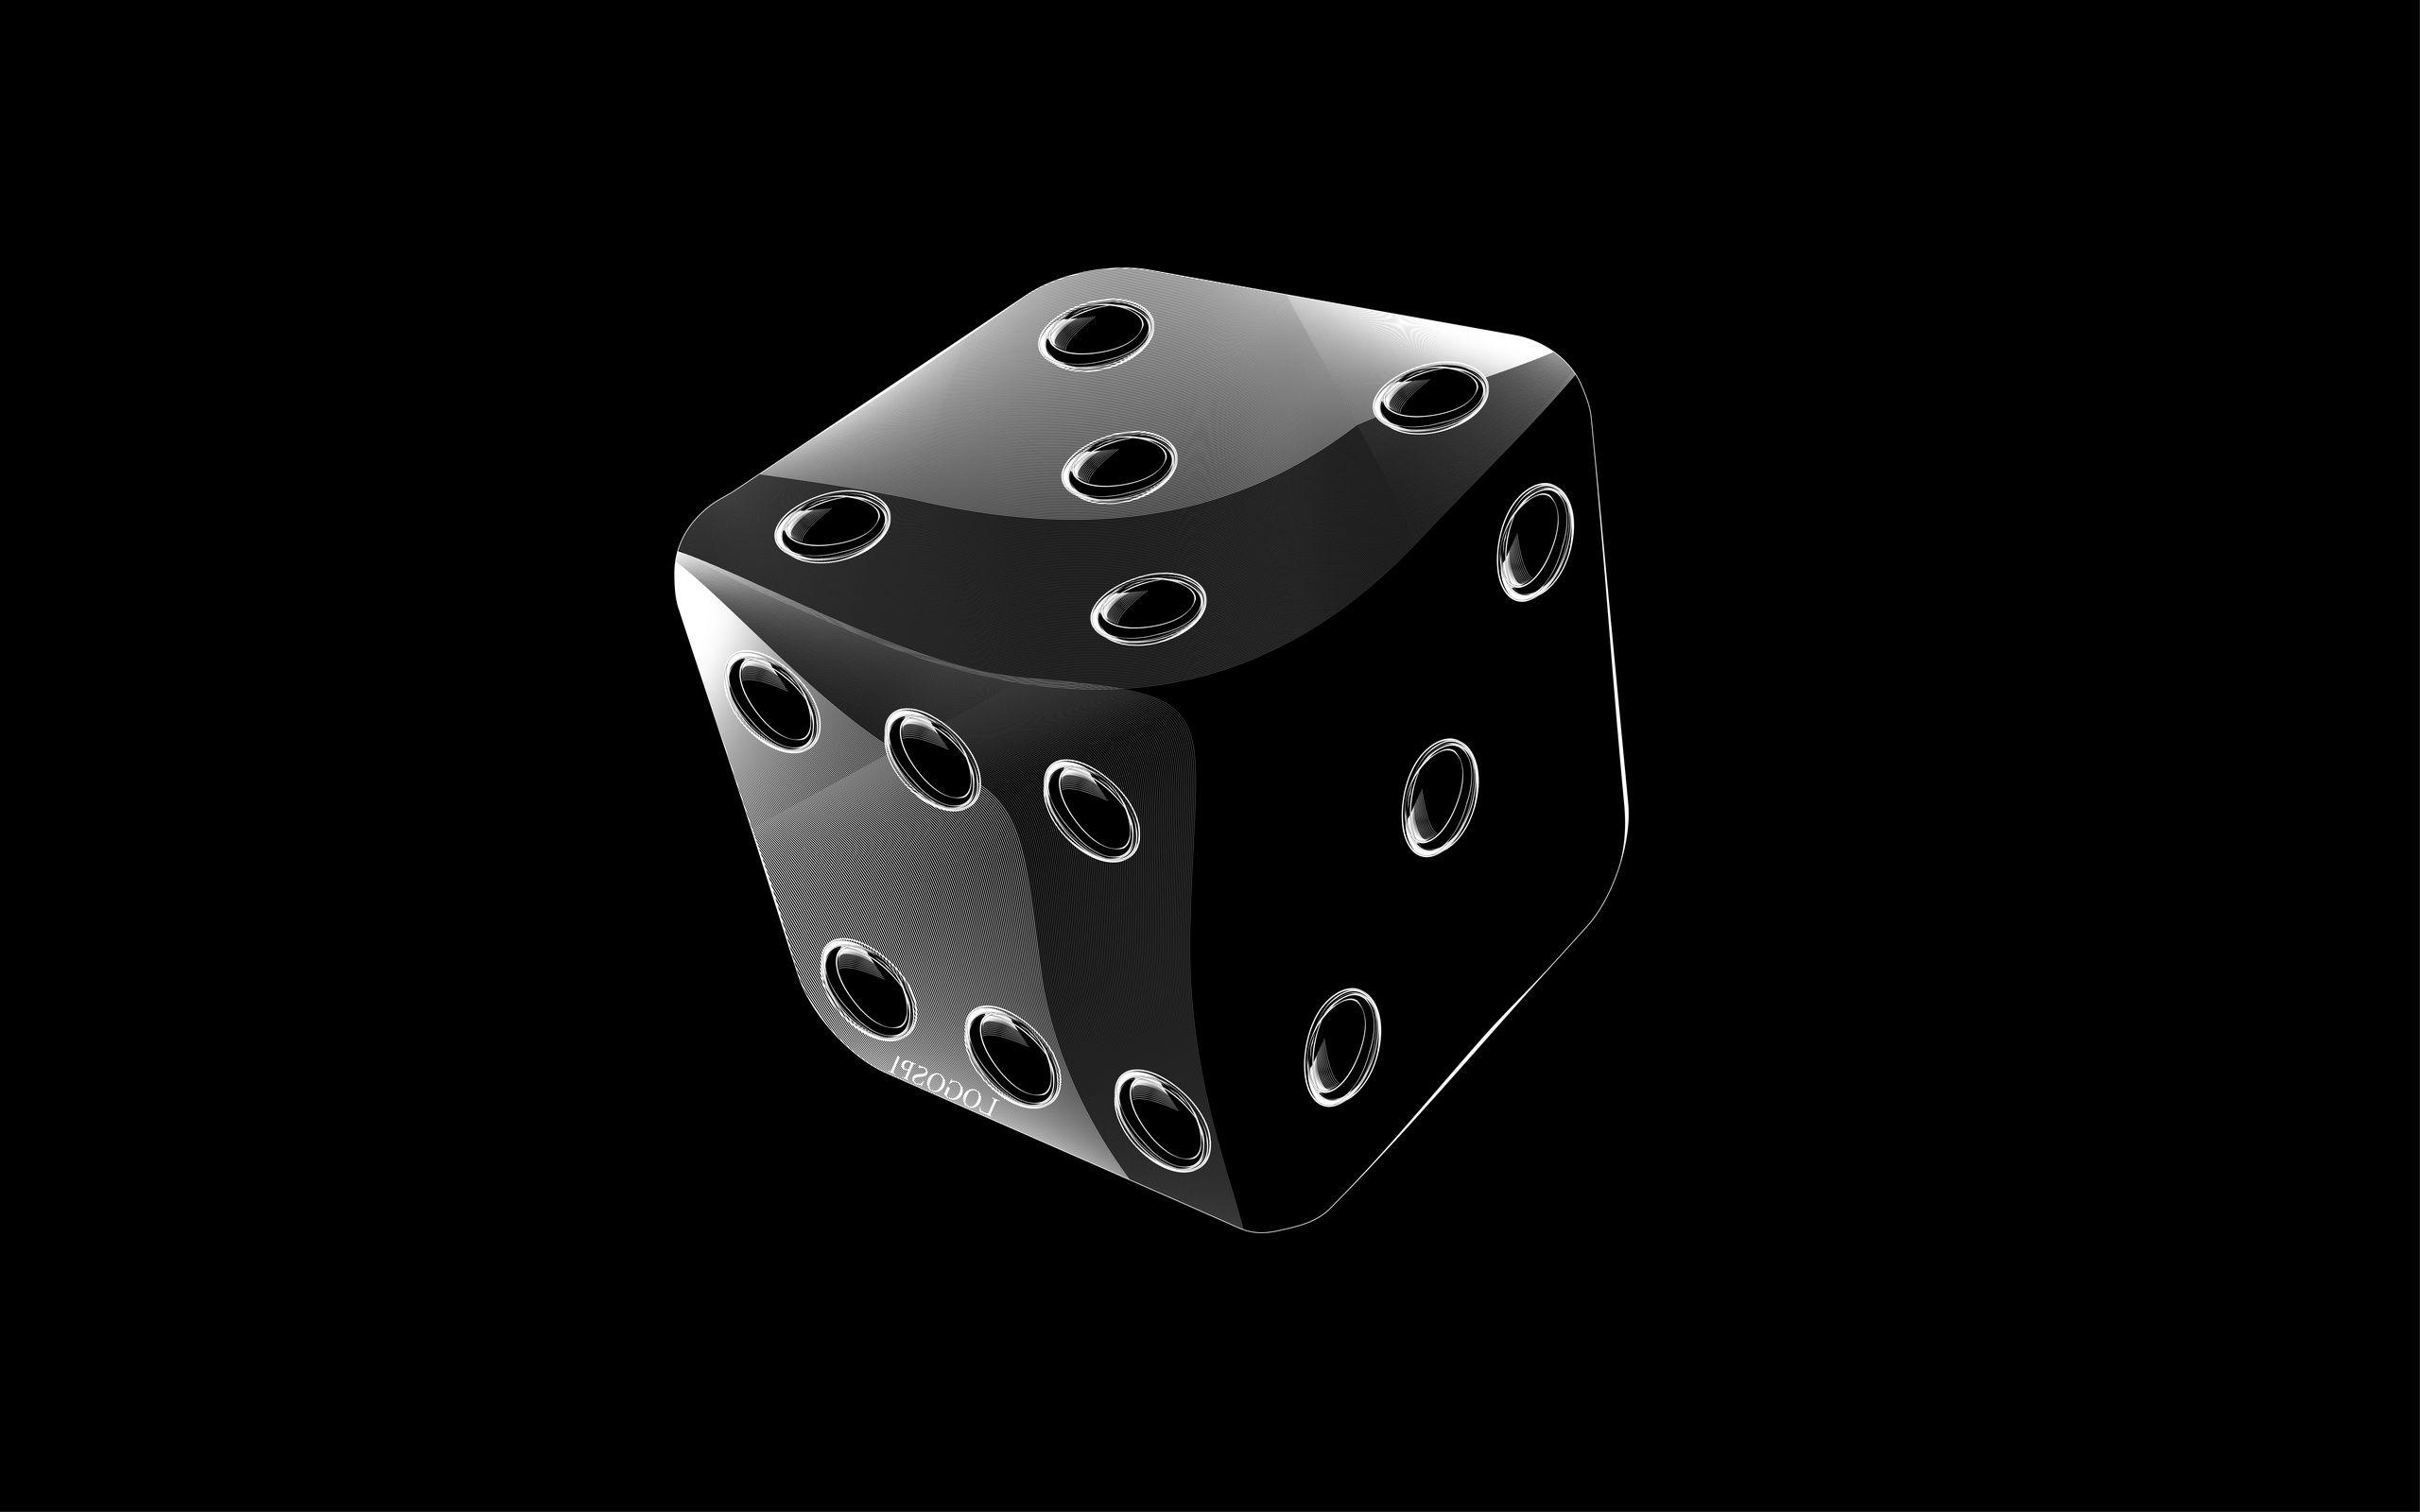 Dice in 3D Design on Black Background Free and Wallpaper